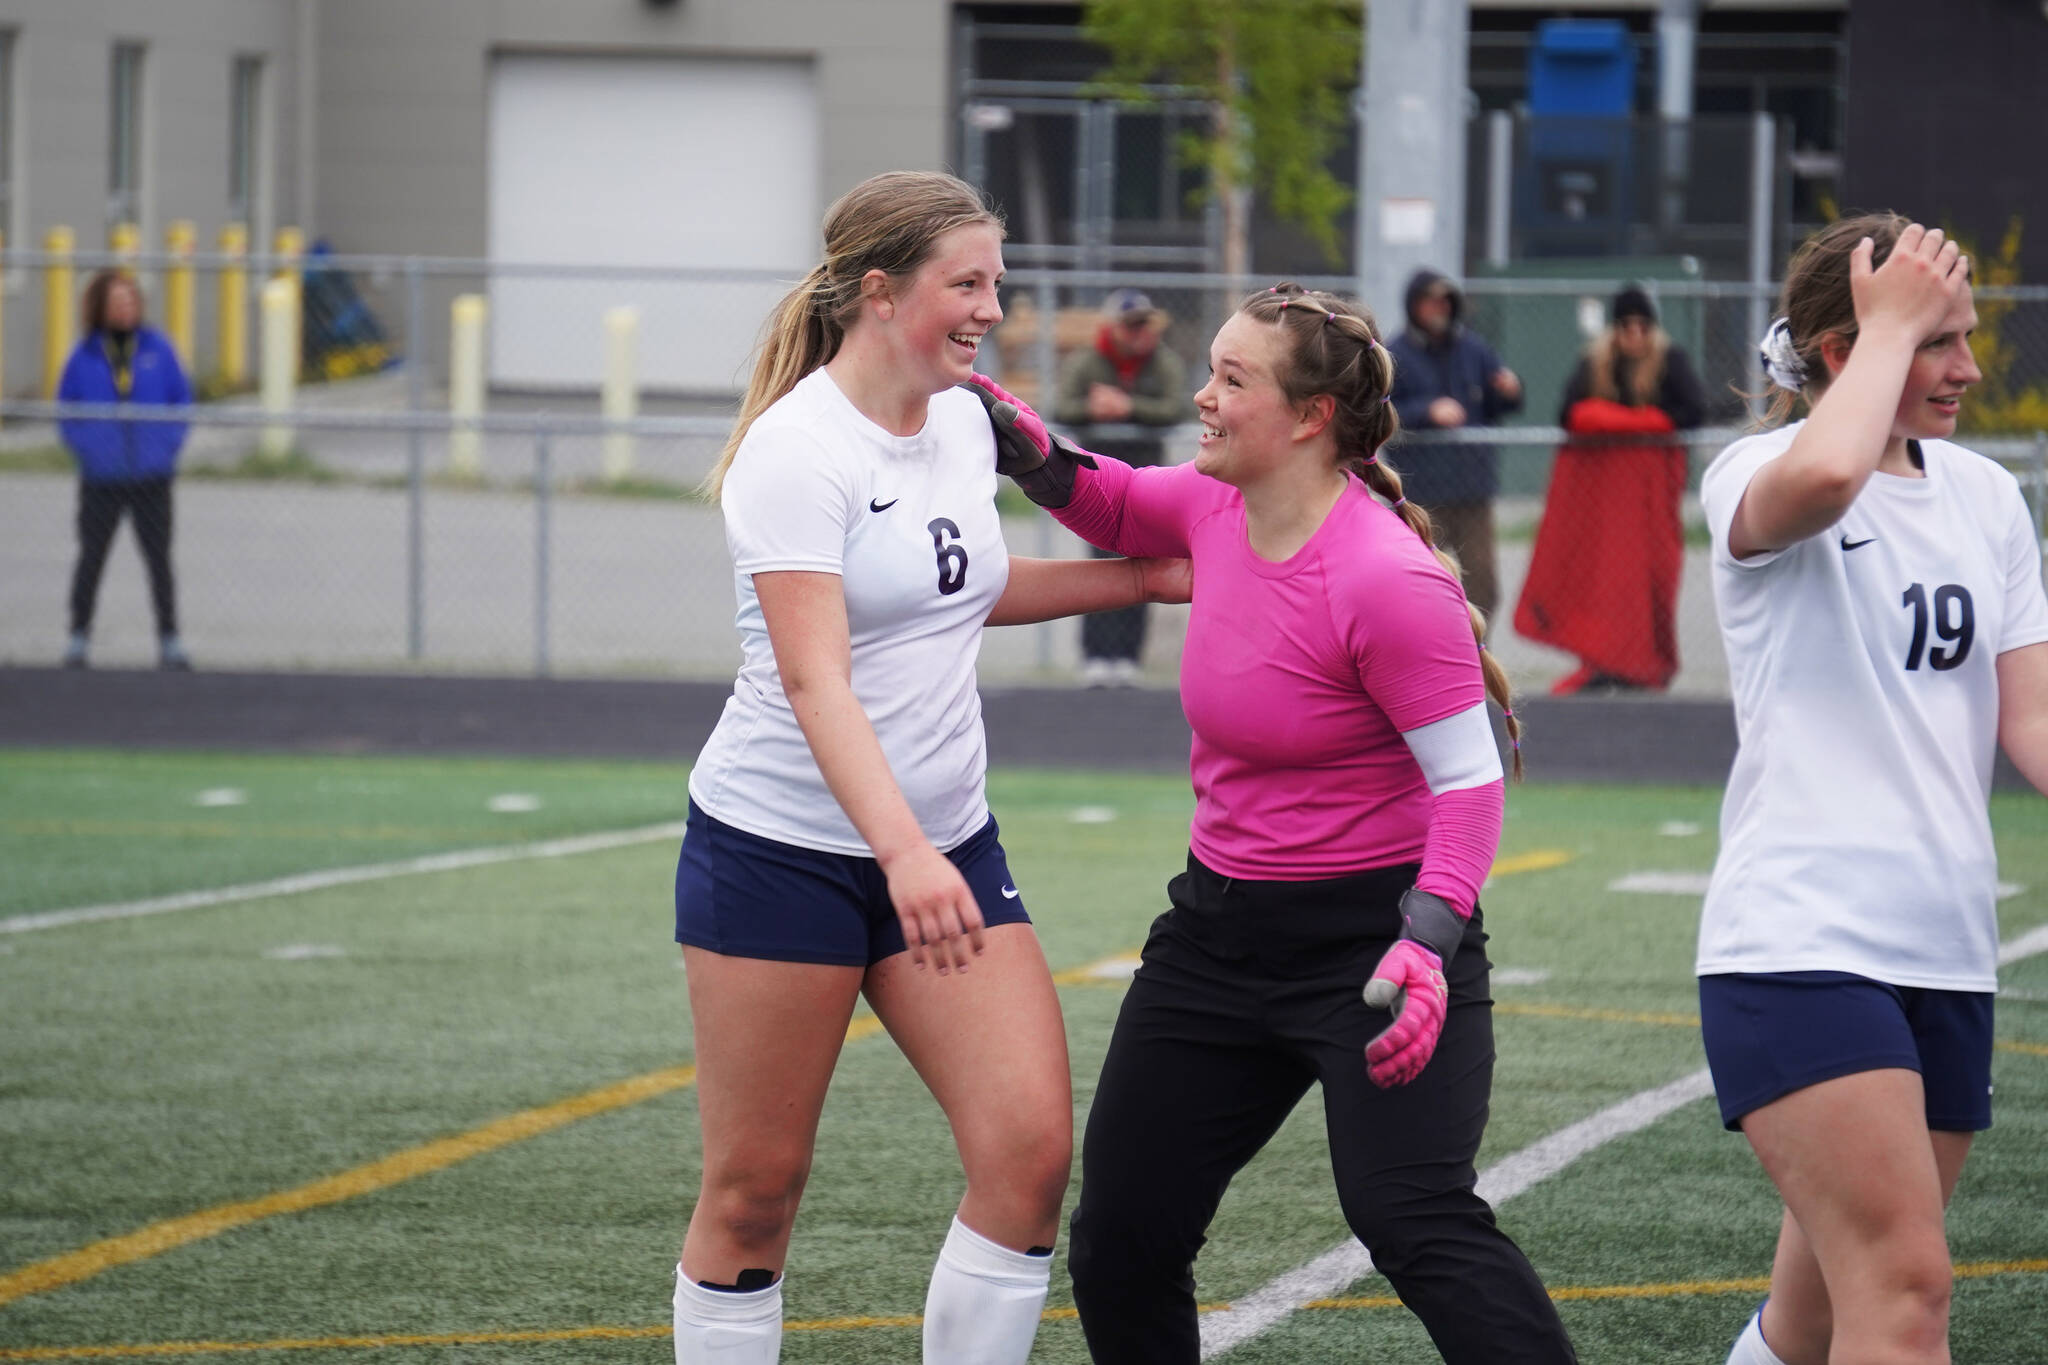 Soldotna’s Alexandra Lee and Sunny Miller celebrate after the end of the fourth half of overtime during the Division II Soccer State Championship on Saturday, May 27, 2023, at West Anchorage High School in Anchorage, Alaska. (Jake Dye/Peninsula Clarion)